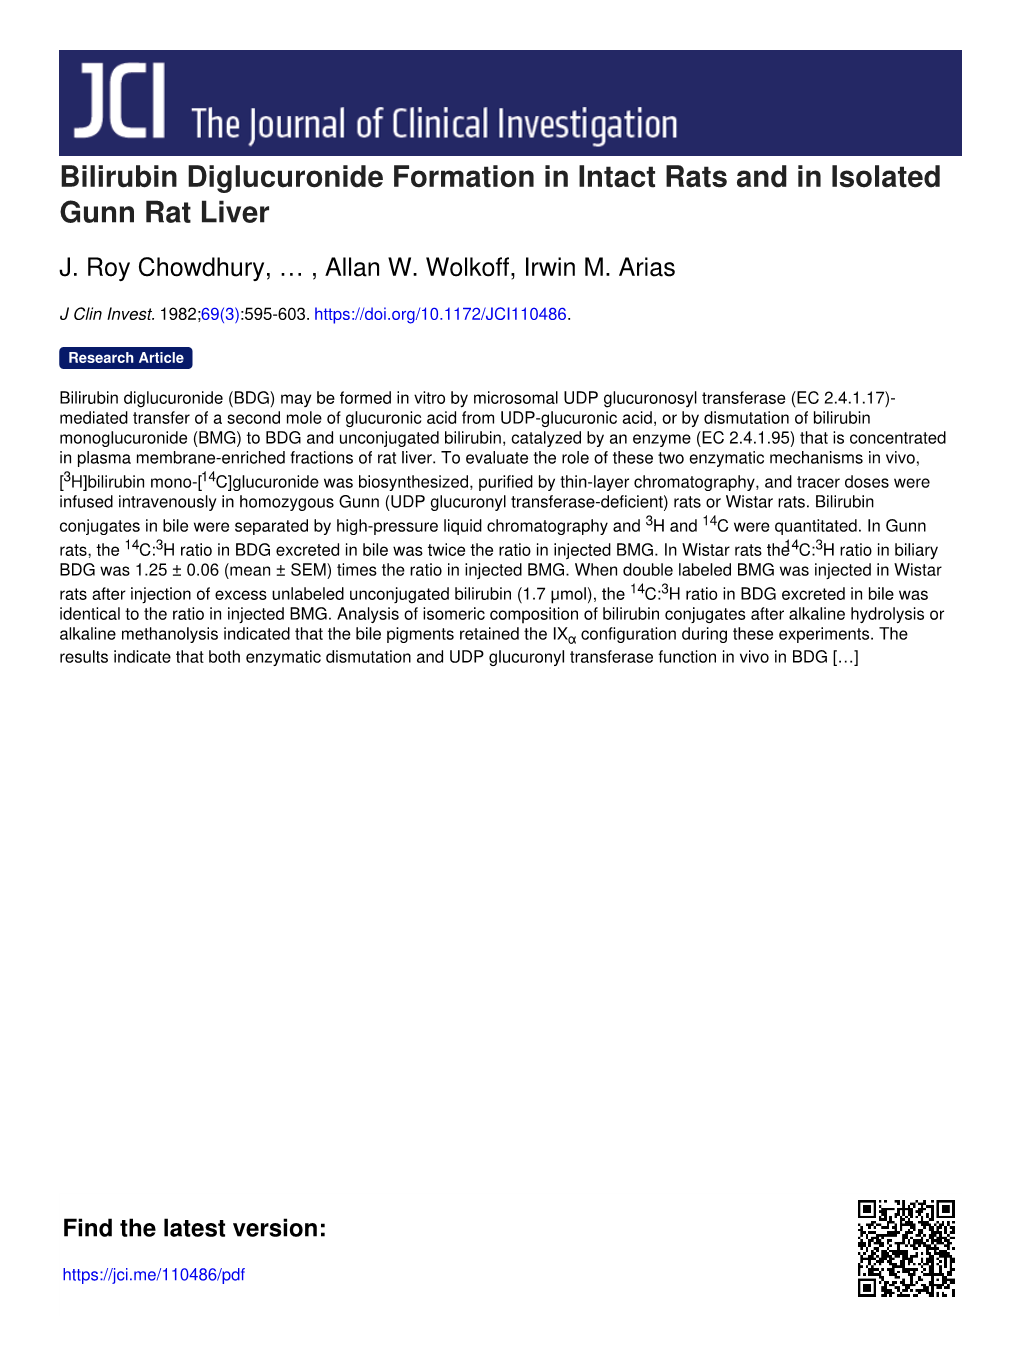 Bilirubin Diglucuronide Formation in Intact Rats and in Isolated Gunn Rat Liver